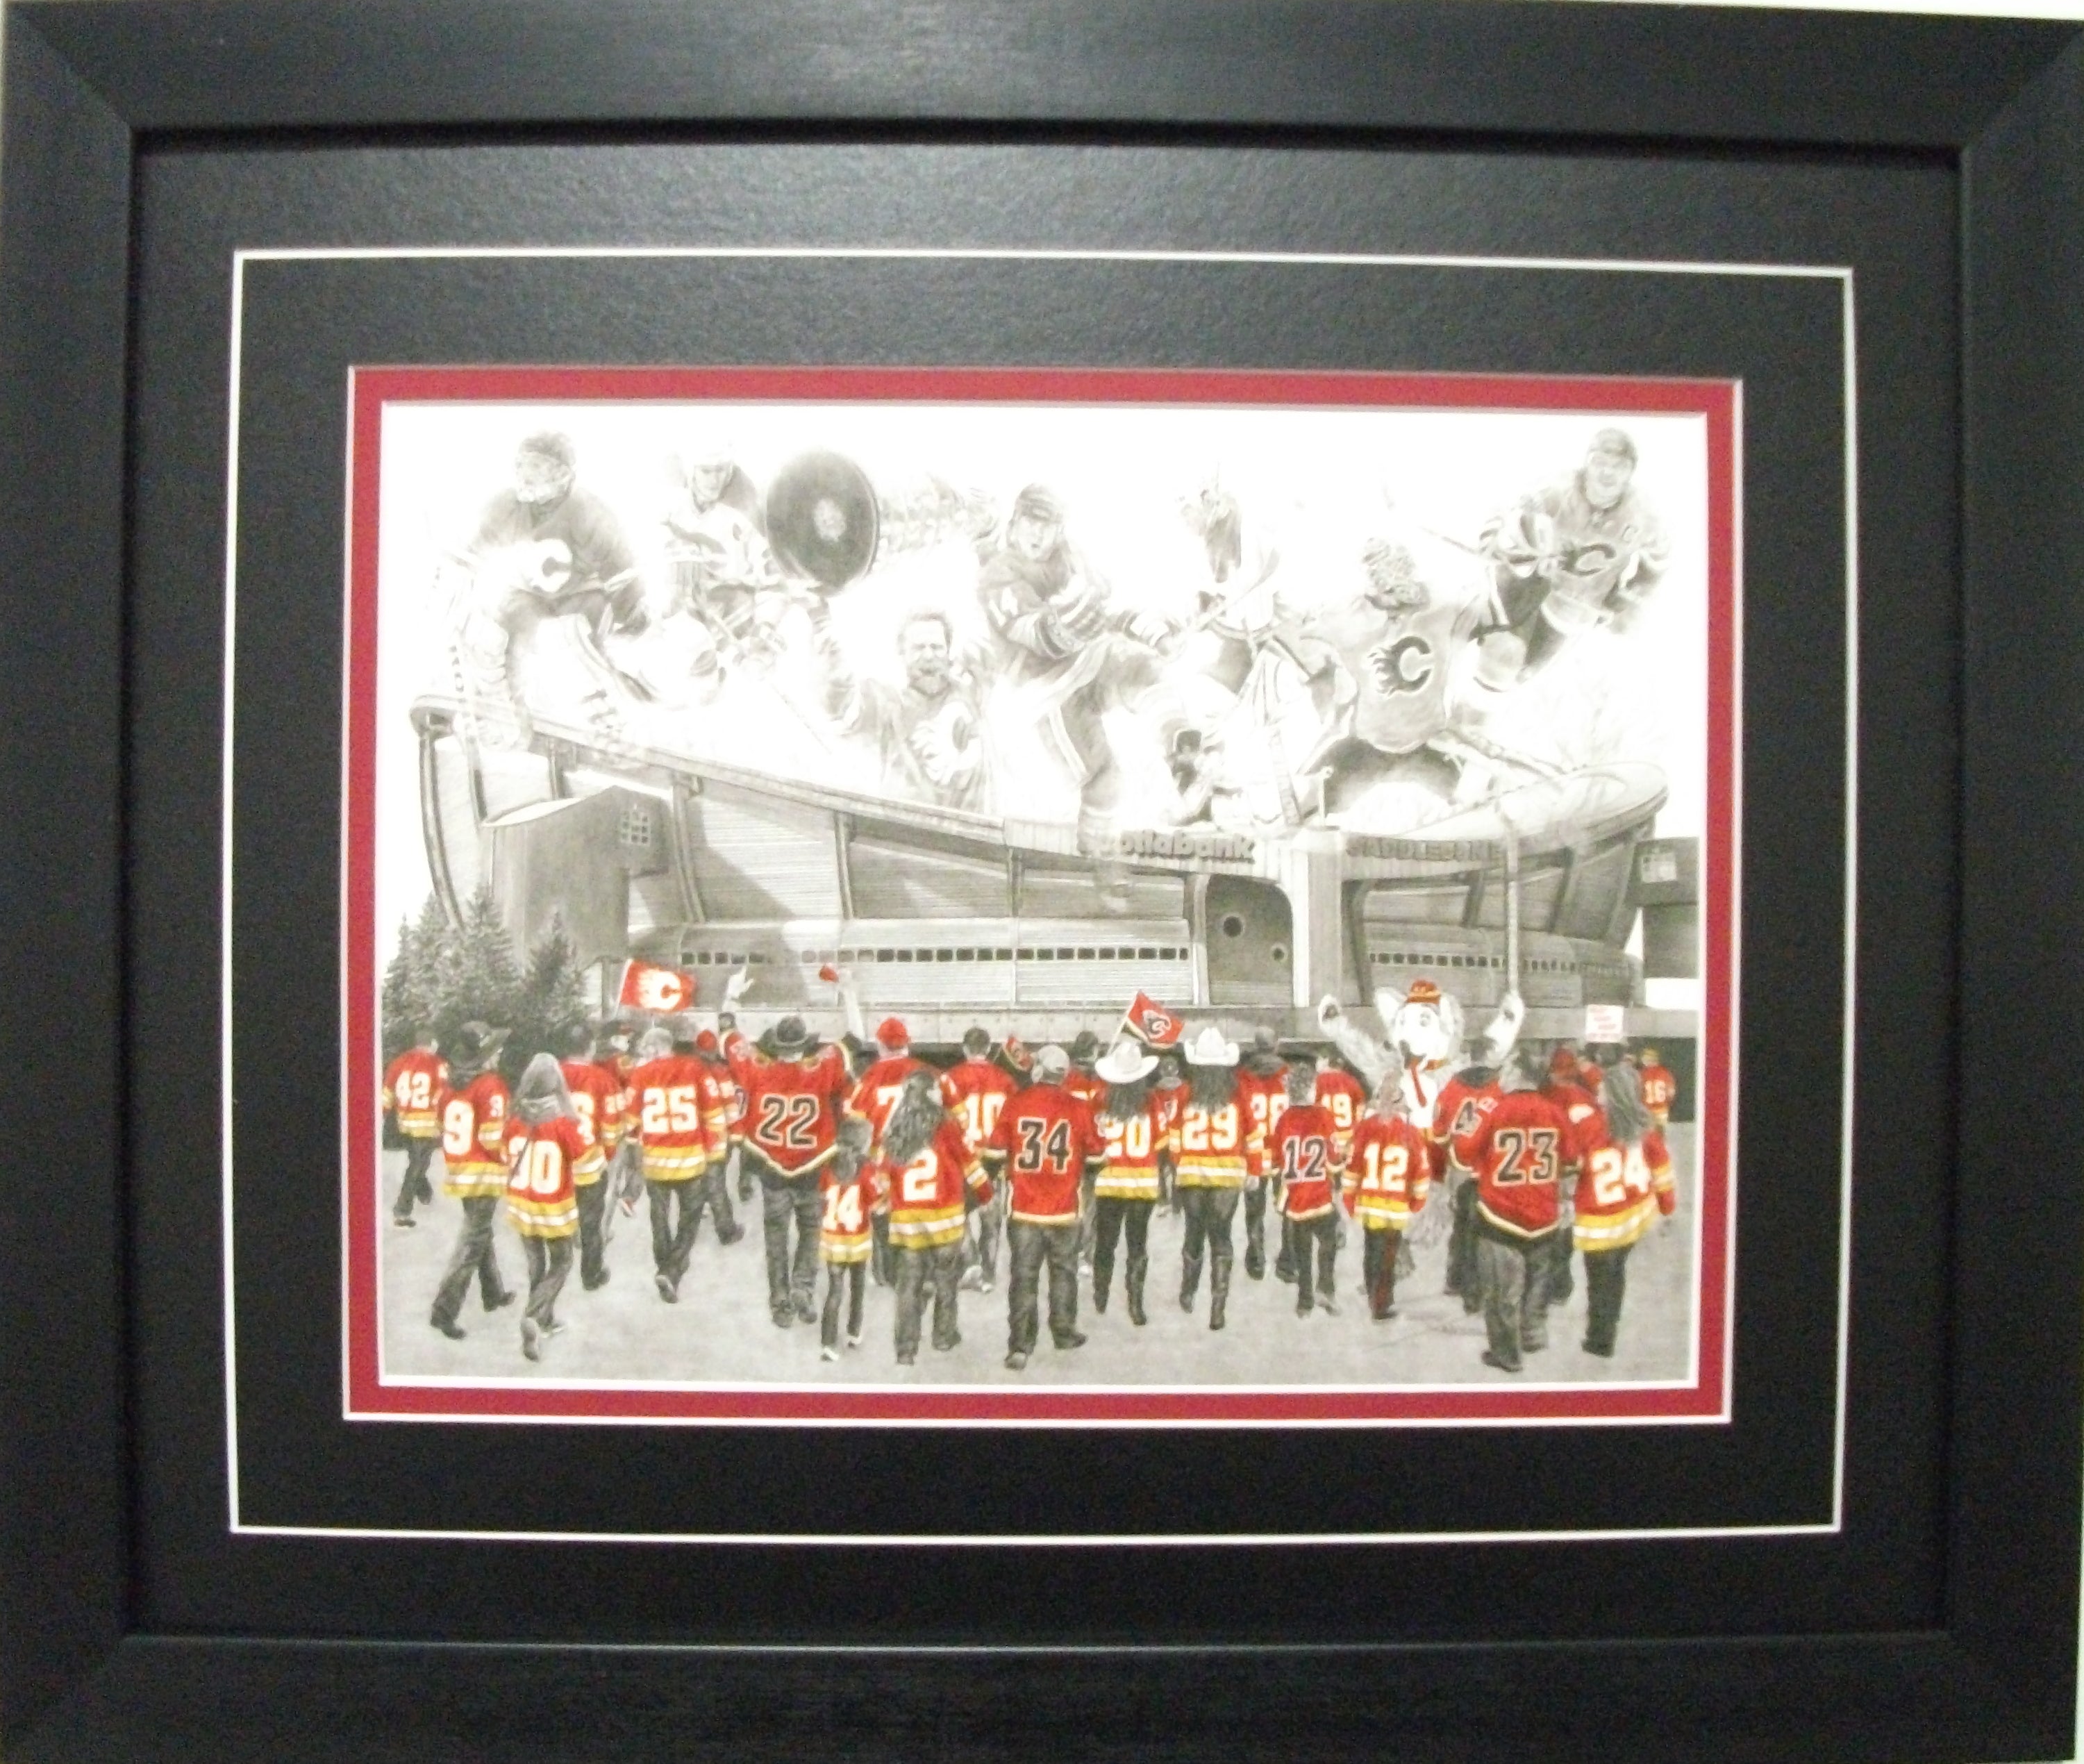 Calgary Flames "C of Red" Game Day Series  by Jeremy Bresciani